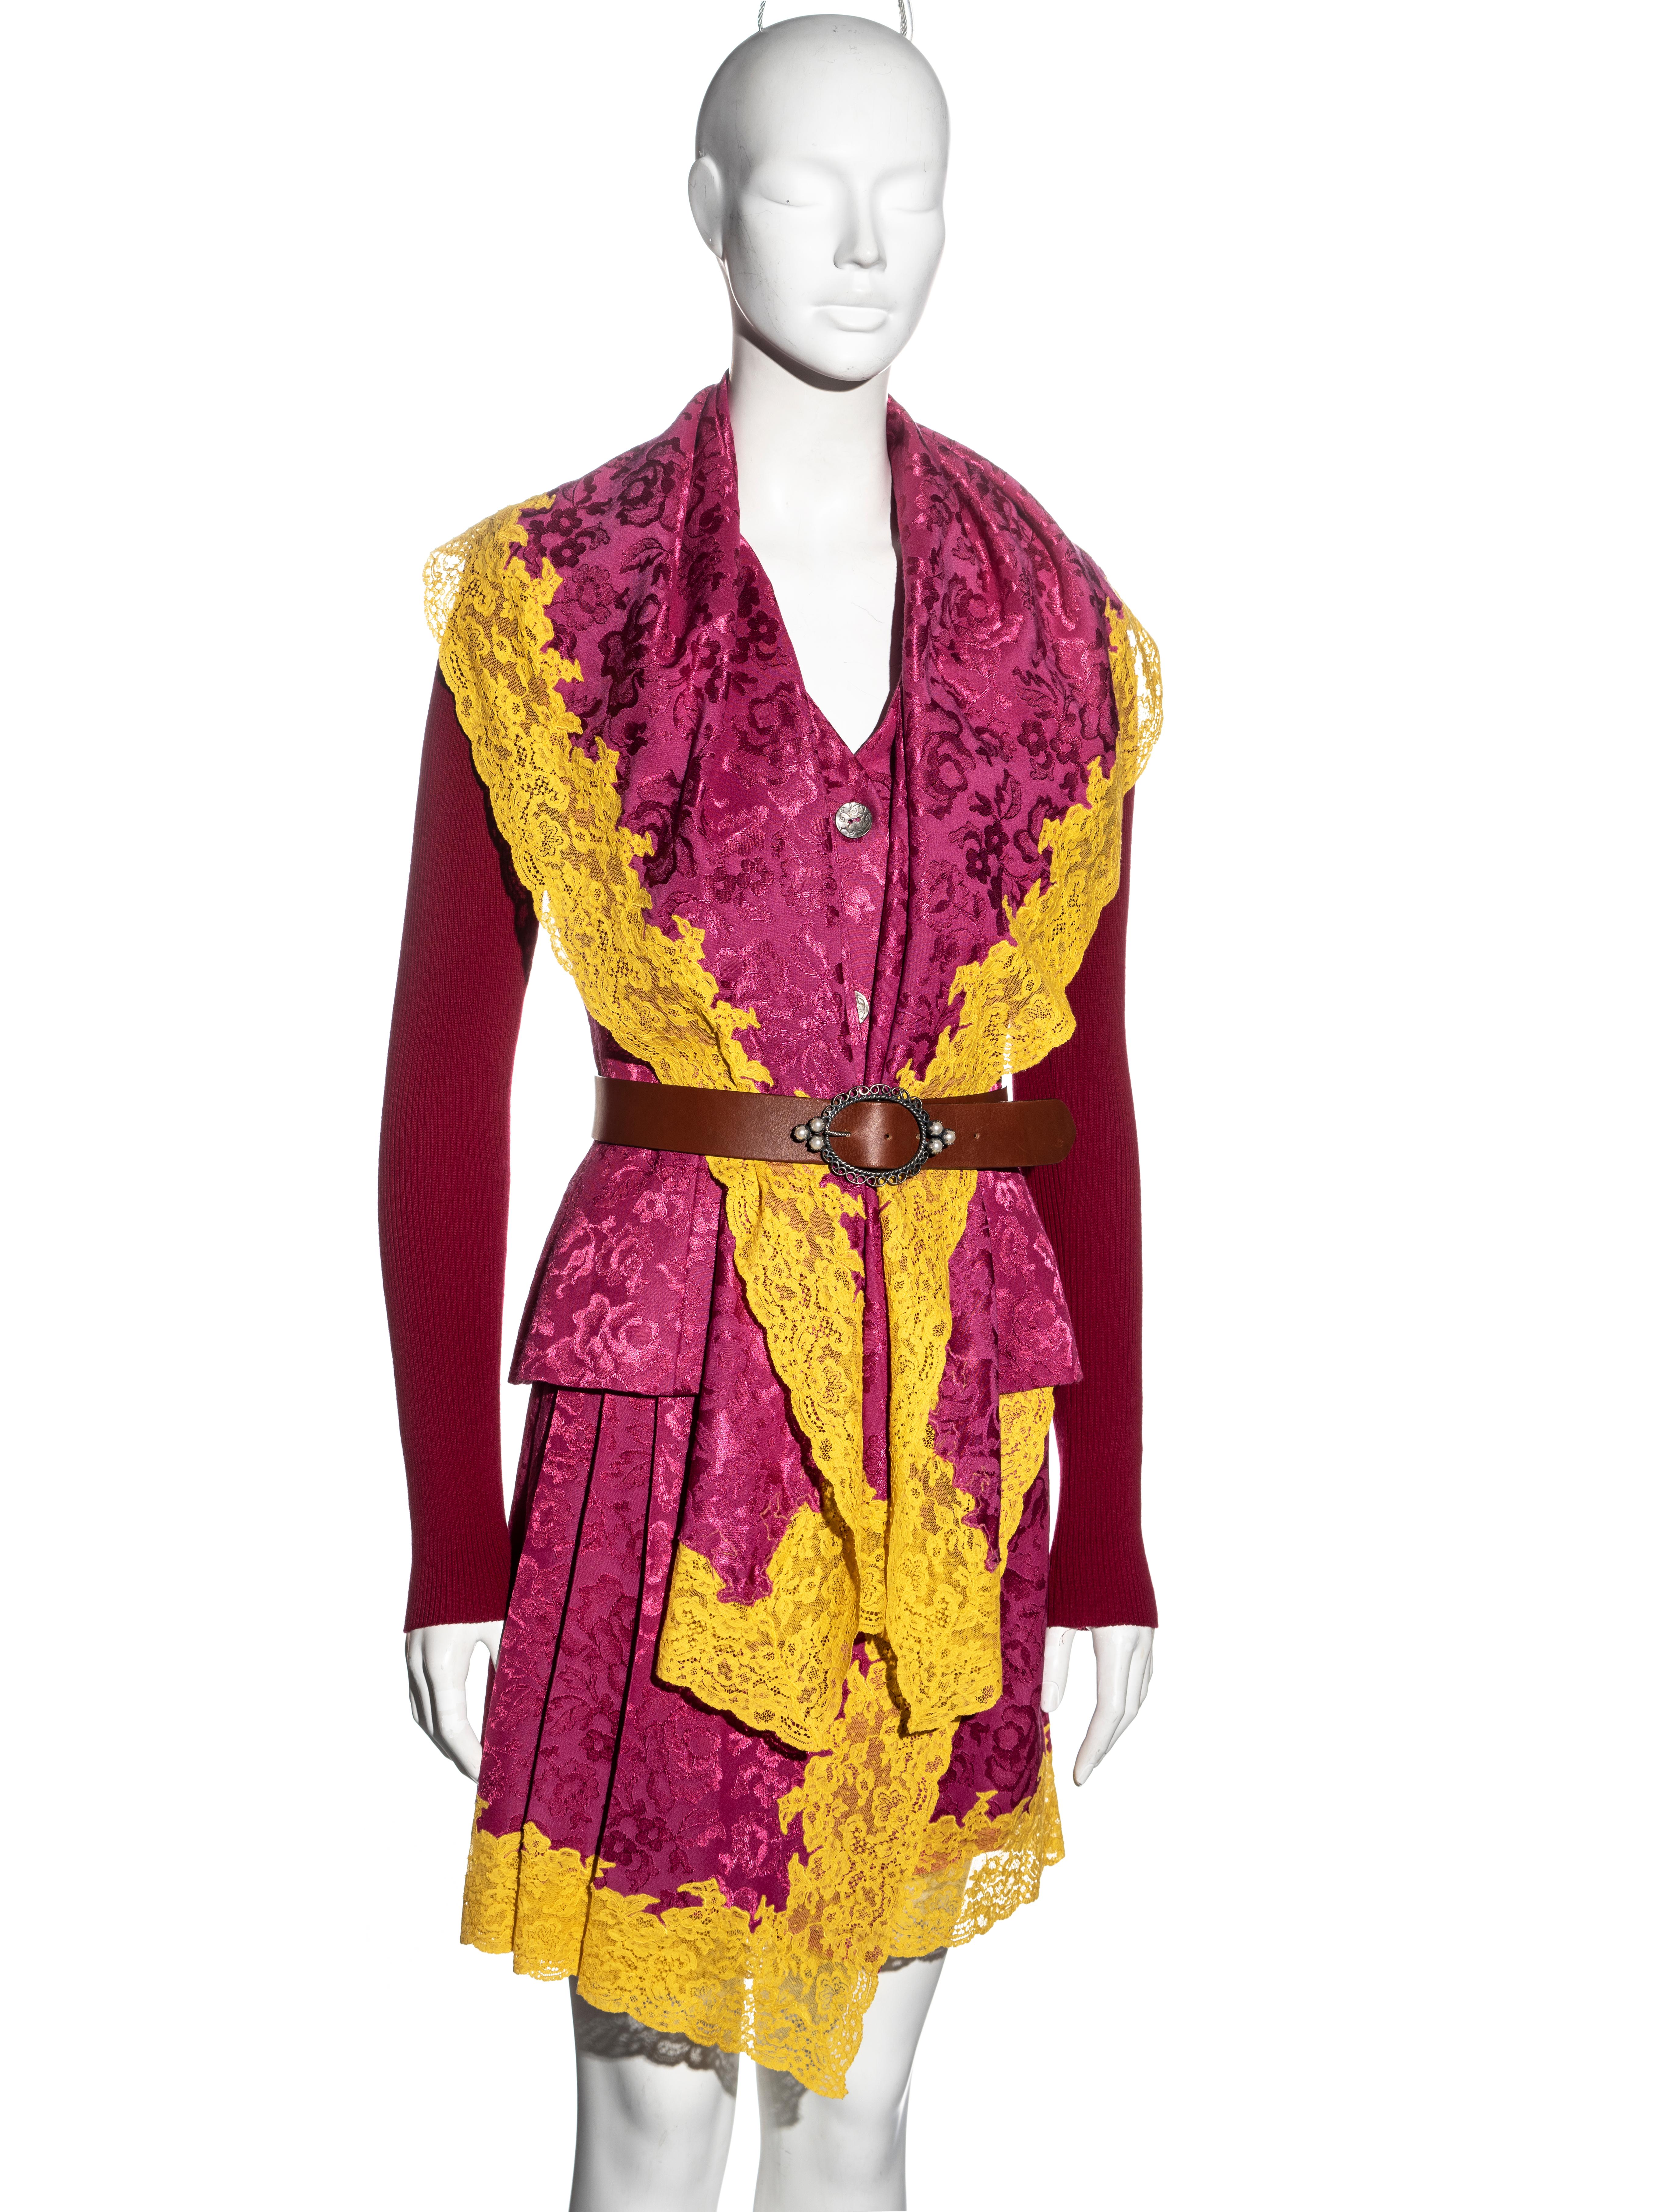 ▪ Christian Dior skirt suit
▪ Designed by John Galliano
▪ Pink jacquard wool 
▪ Yellow Calais lace trim 
▪ Single-breasted jacket with scarf collar
▪ Ribbed-knit sleeves
▪ Pleated wrap skirt 
▪ Brown leather belt 
▪ Jacquard silk lining 
▪ FR 38 -